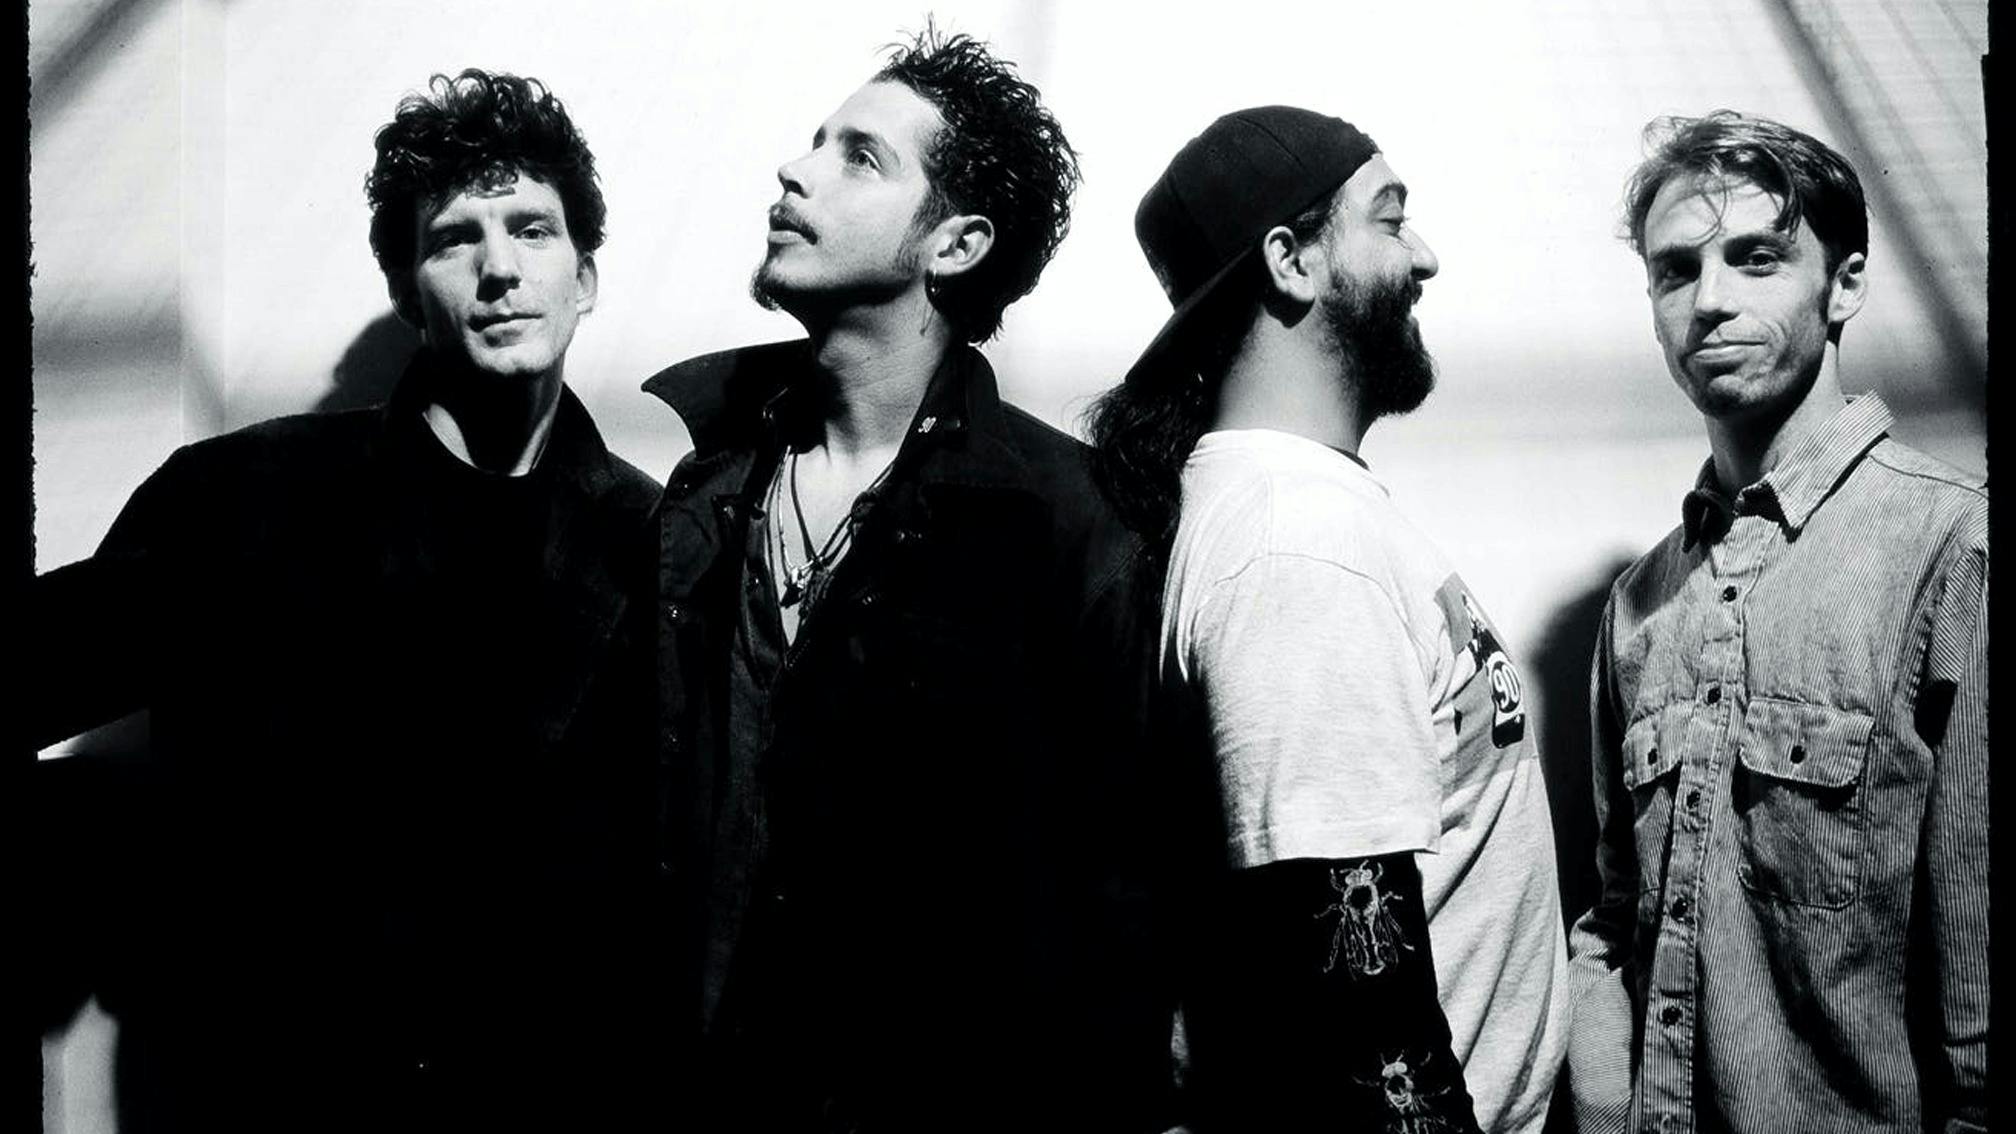 The haunting, traumatic story behind Soundgarden’s Superunknown